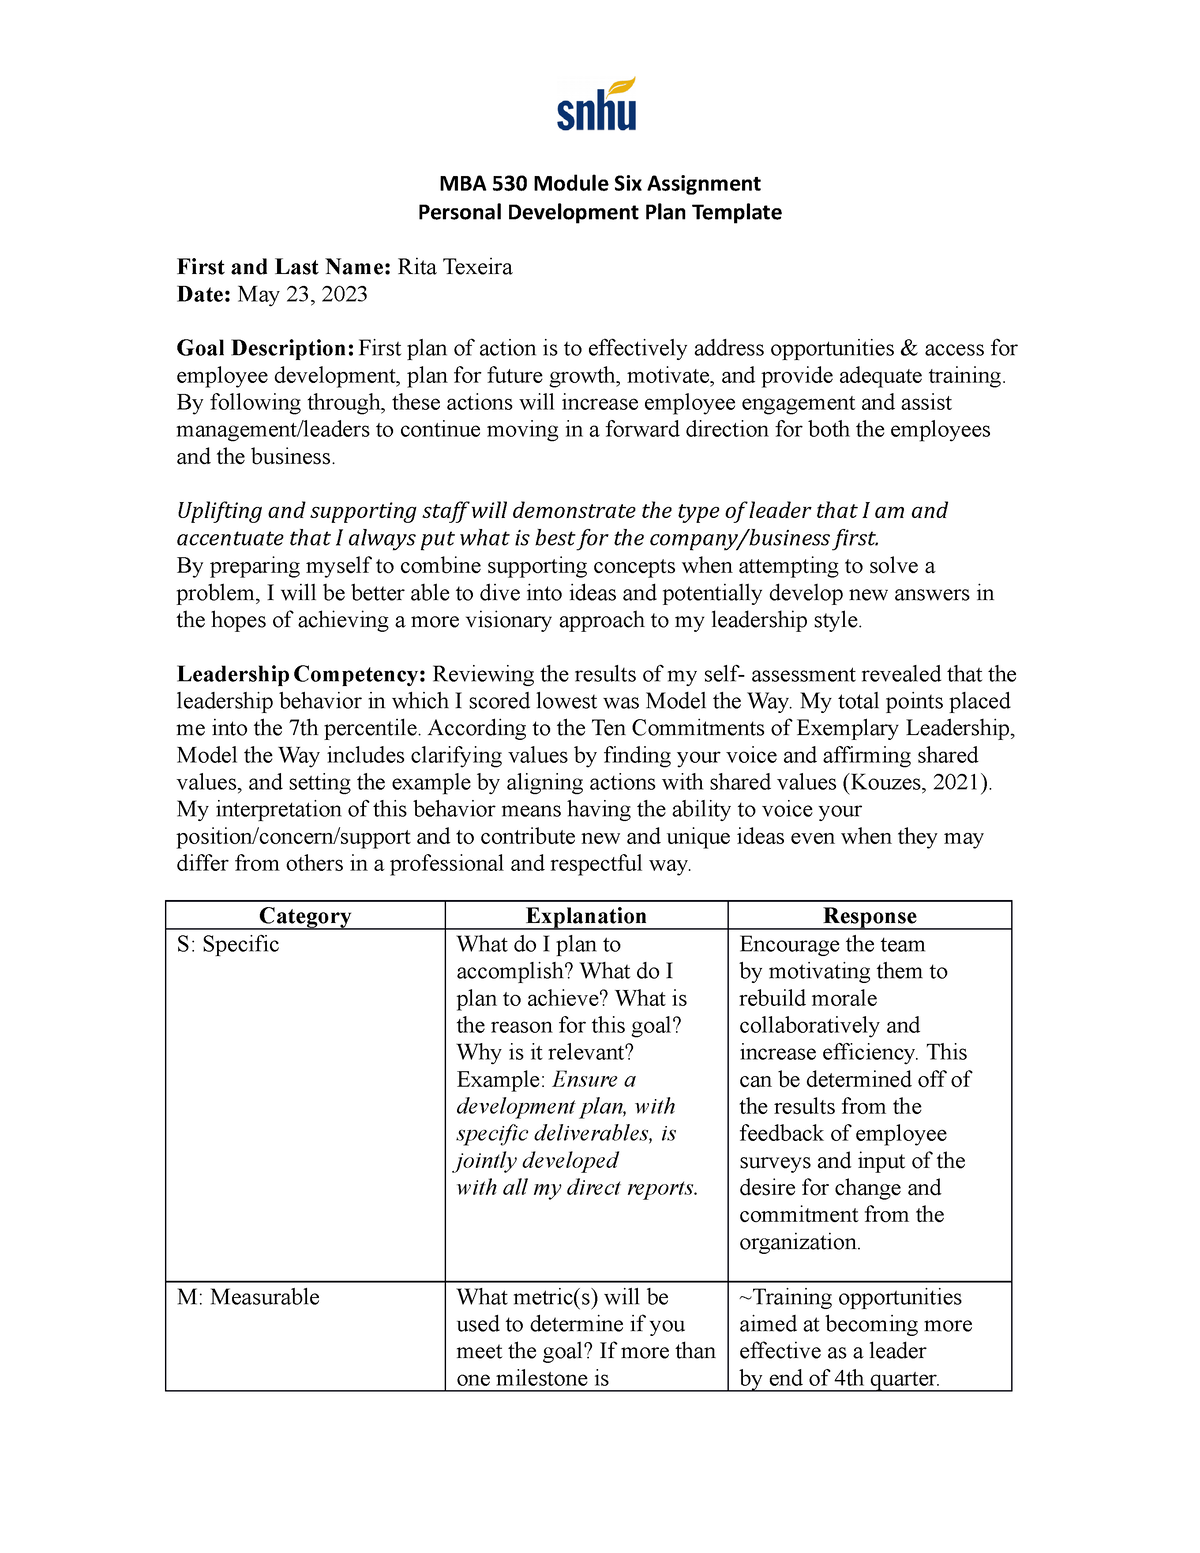 mba 530 module four case study guidelines and rubric